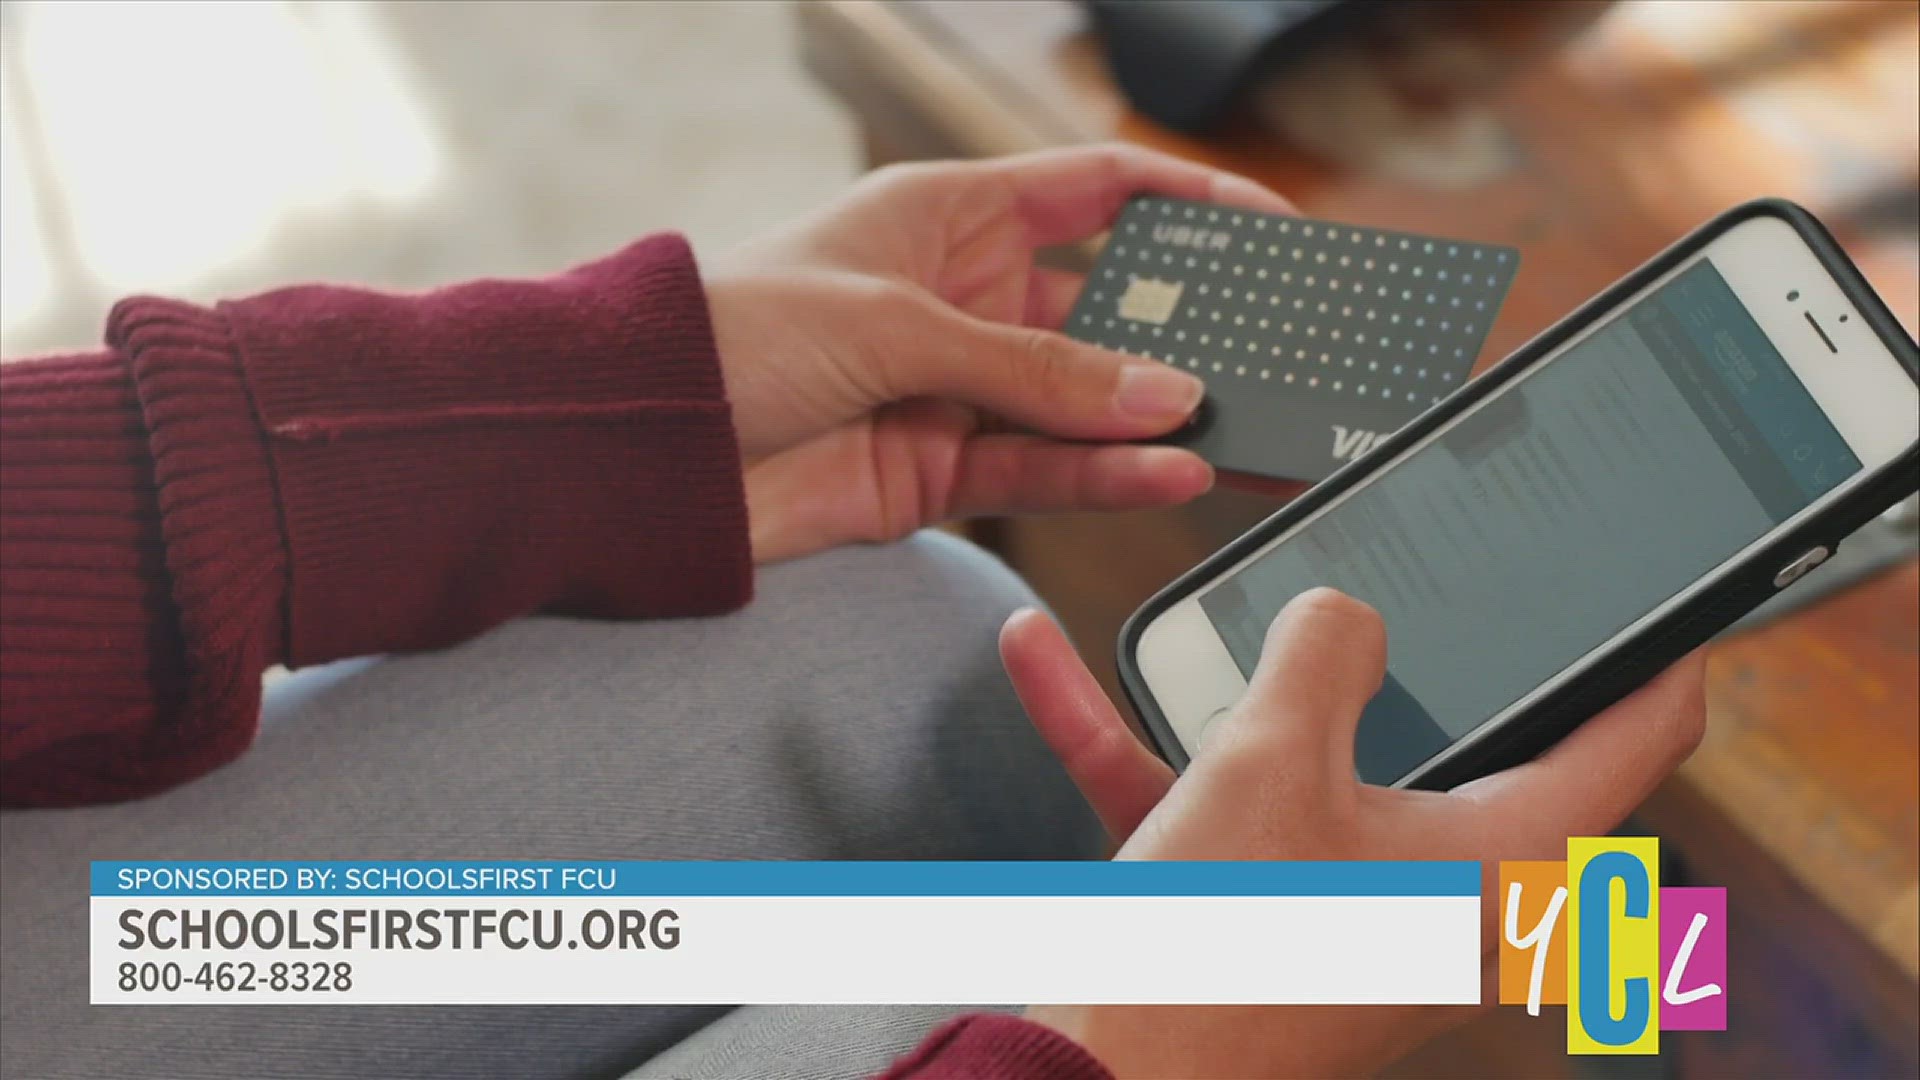 Some gift card recipients will find their card drained of funds before they even use it. Avoid fraud with these tips. This segment is paid by SchoolsFirst FCU.